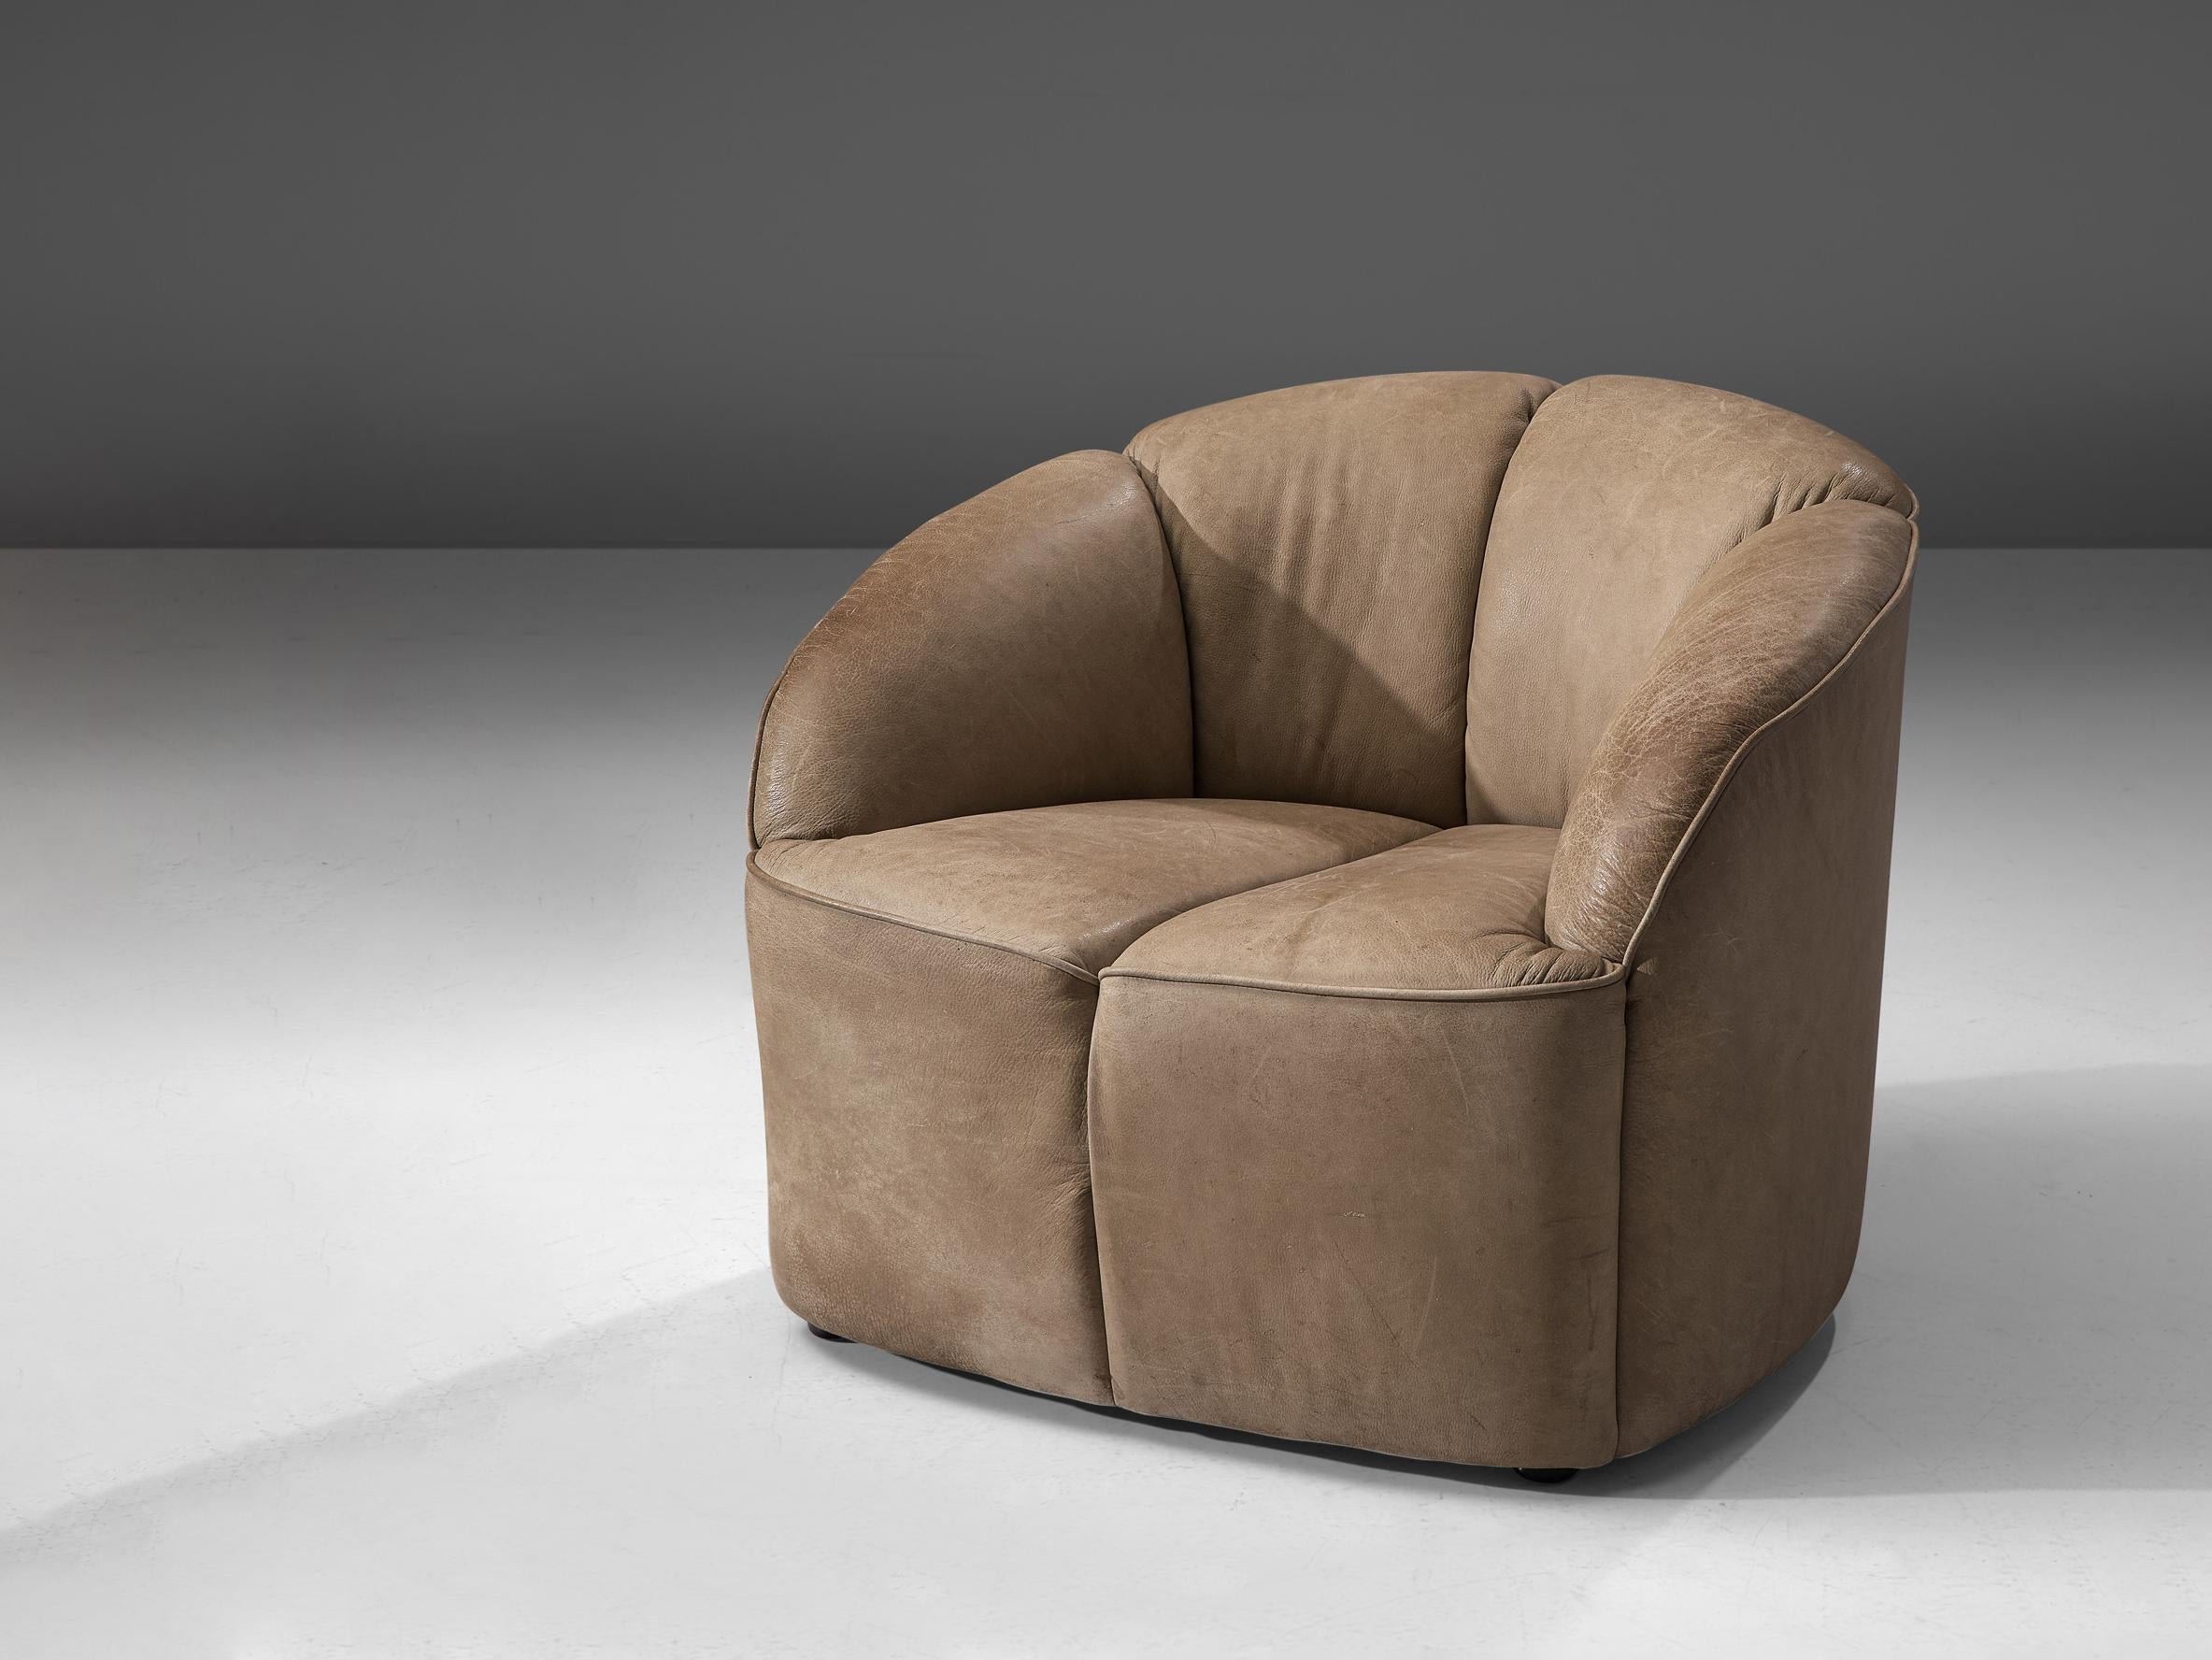 Walter Knoll, lounge chair, leather, Germany, 1960s

This half round lounge chair by Walter Knoll is designed in the 1960s. This model is called Piccolino and has thick, high quality leather upholstery. The bulky lounge chair has a slightly tapered